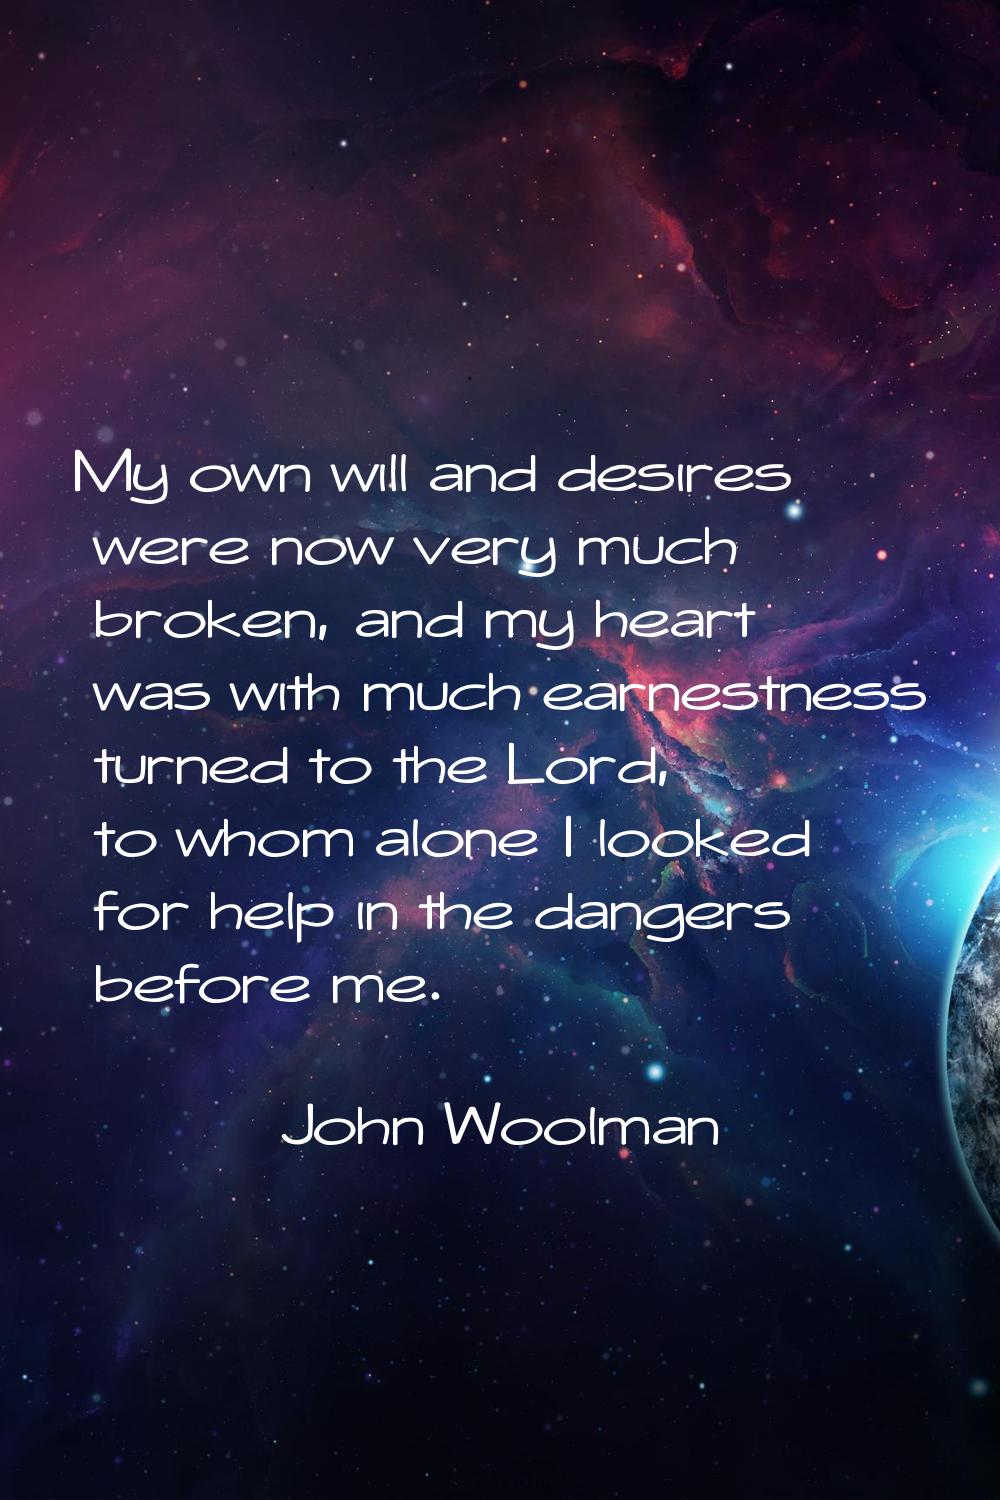 My own will and desires were now very much broken, and my heart was with much earnestness turned to